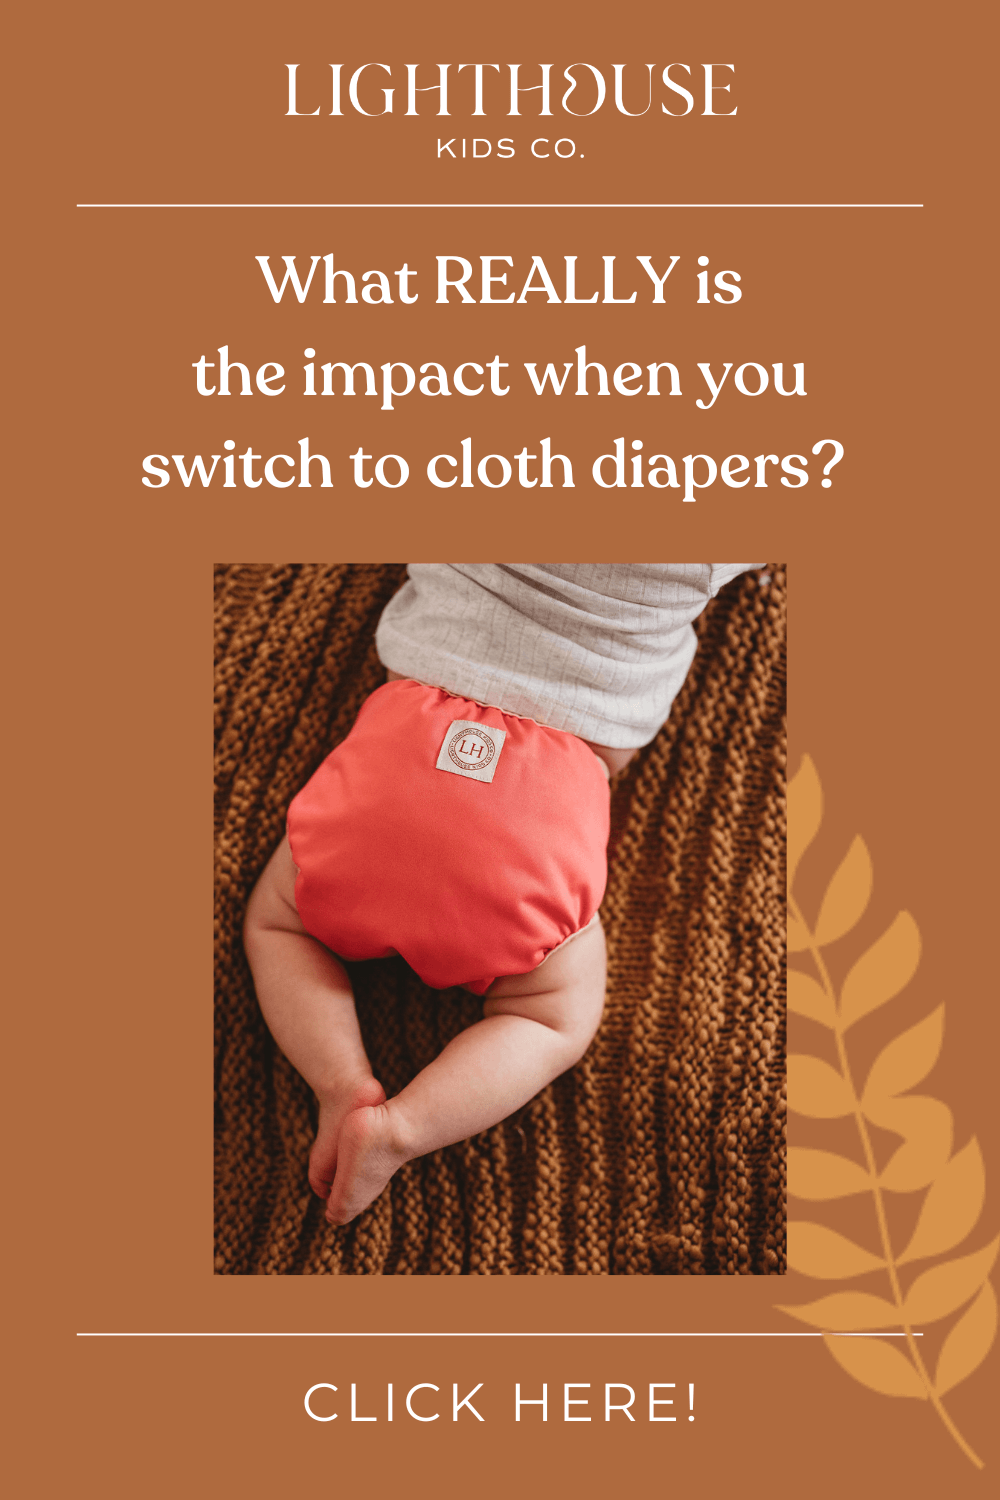 Can cloth diapers really save money?